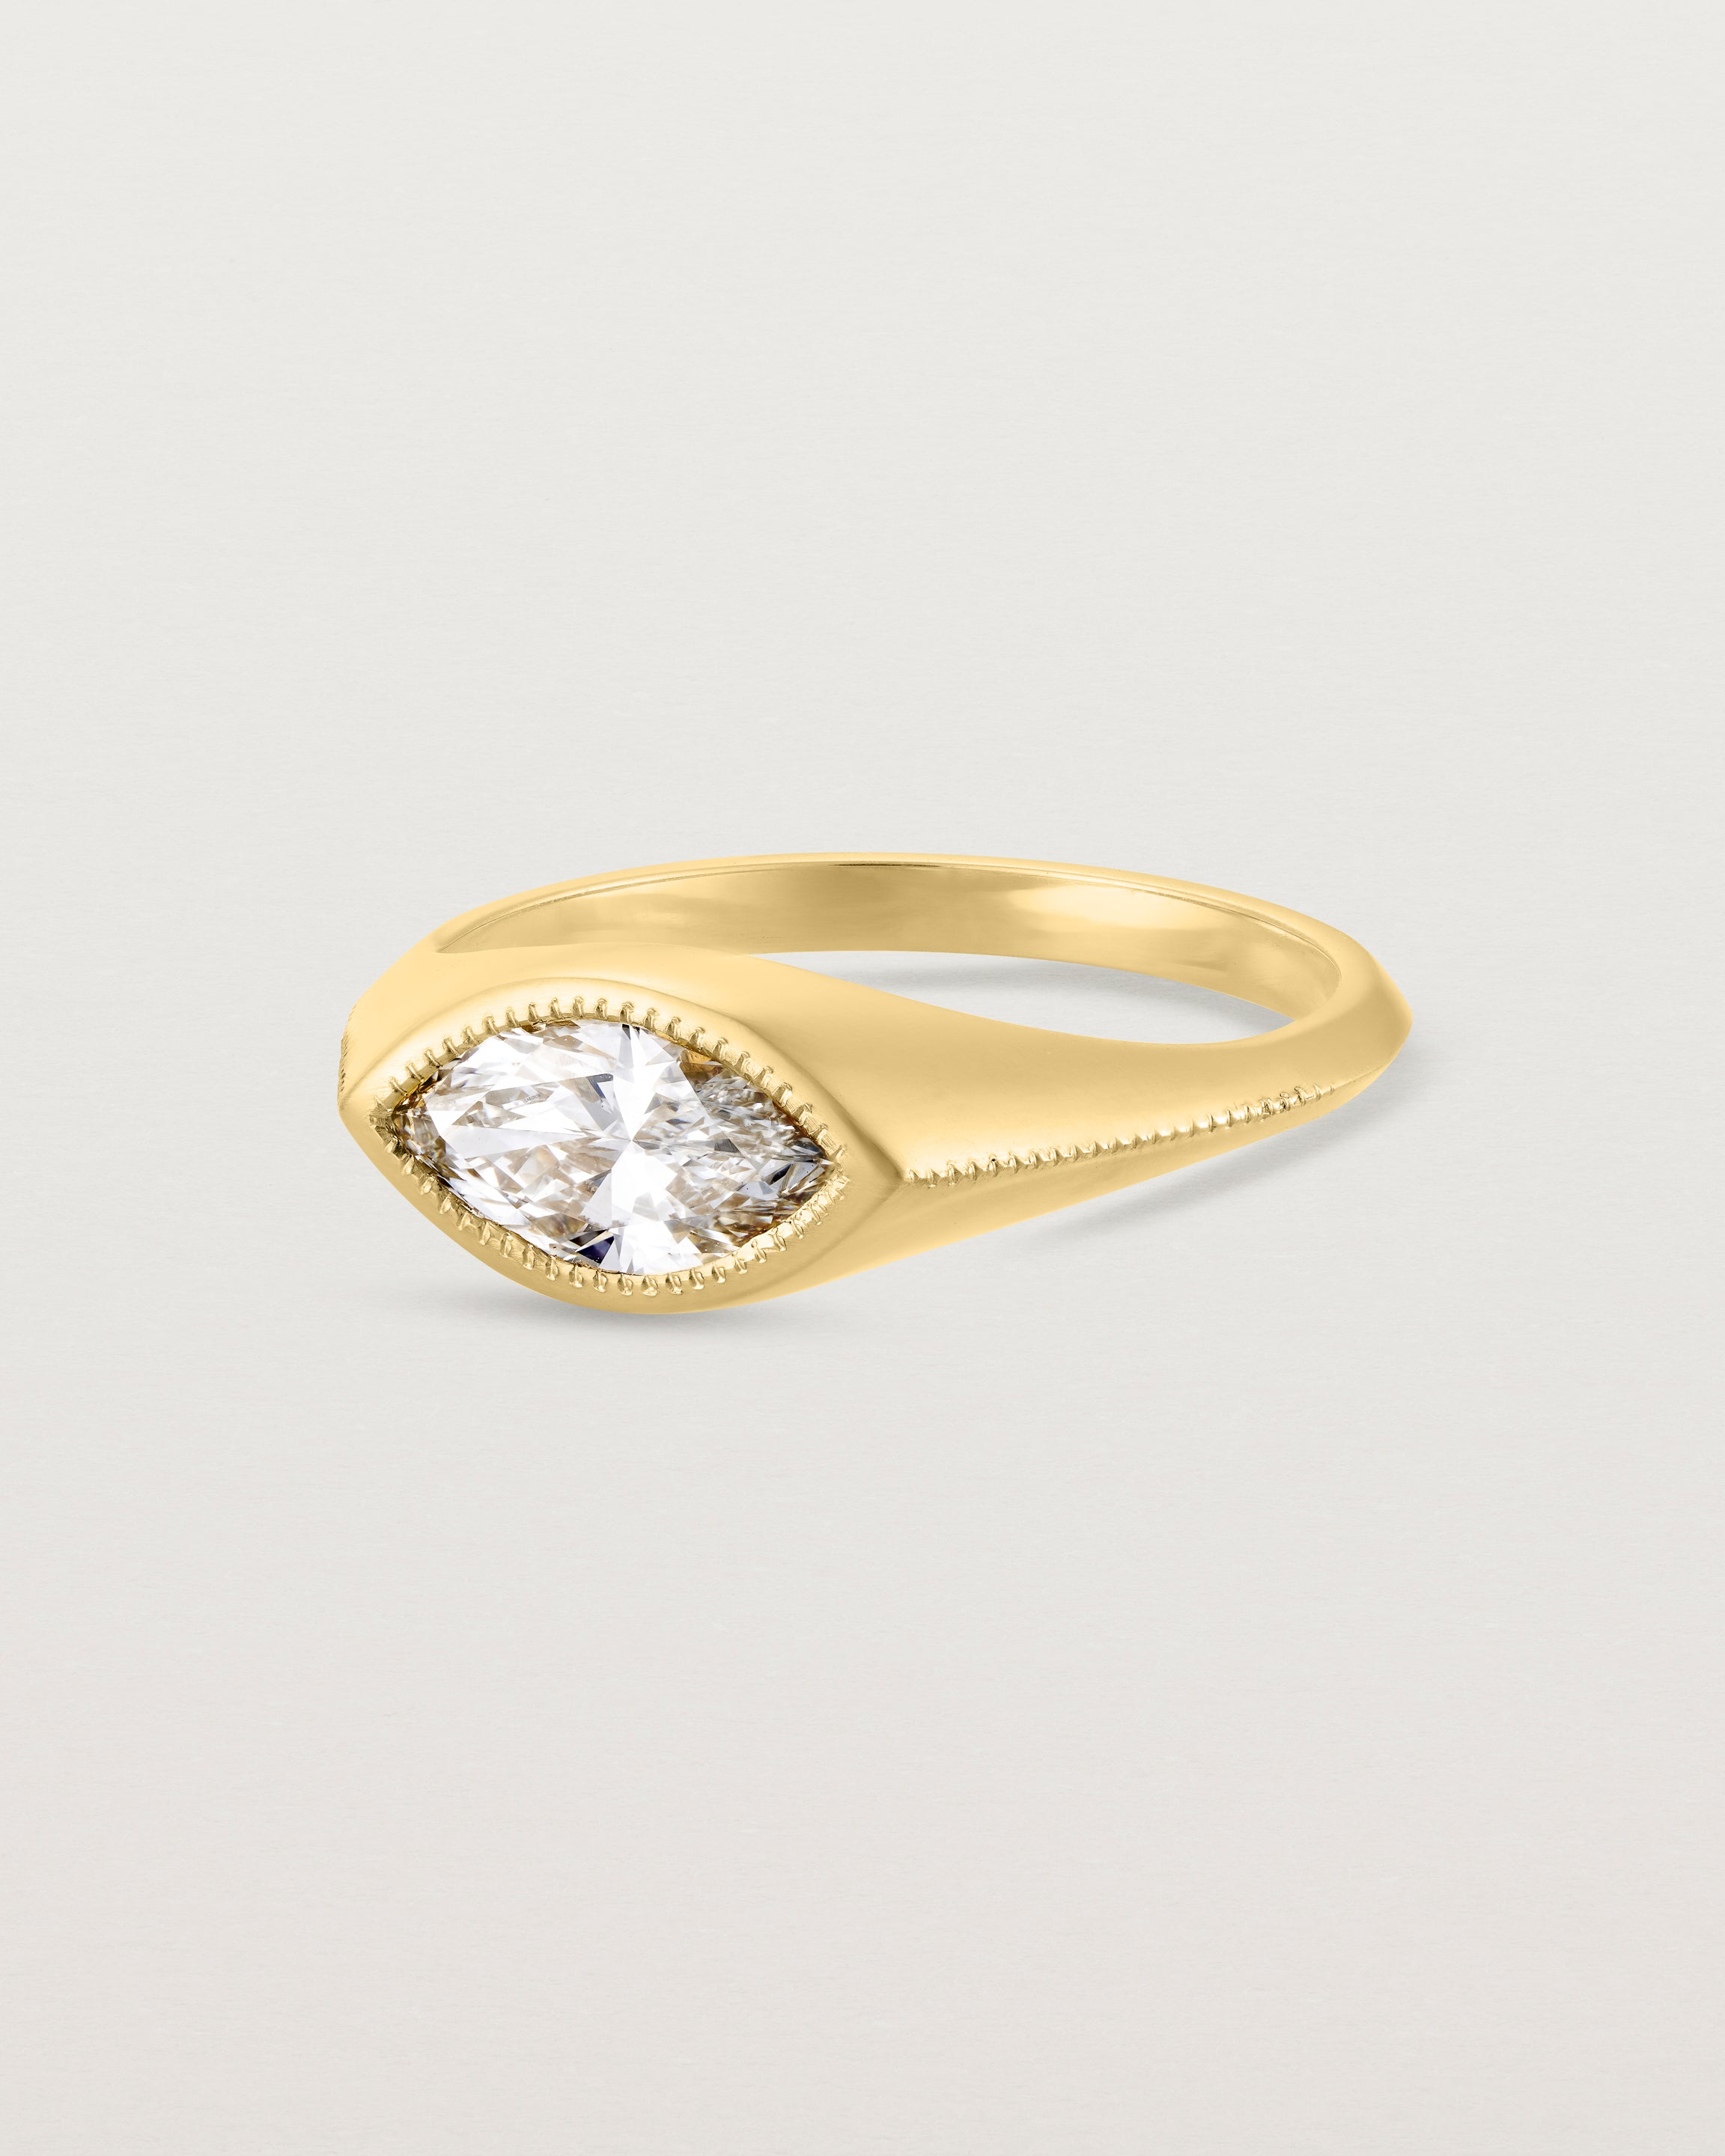 Angled view of the Átlas Marquise Signet | Laboratory Grown Diamond in yellow gold, in a polished finish.